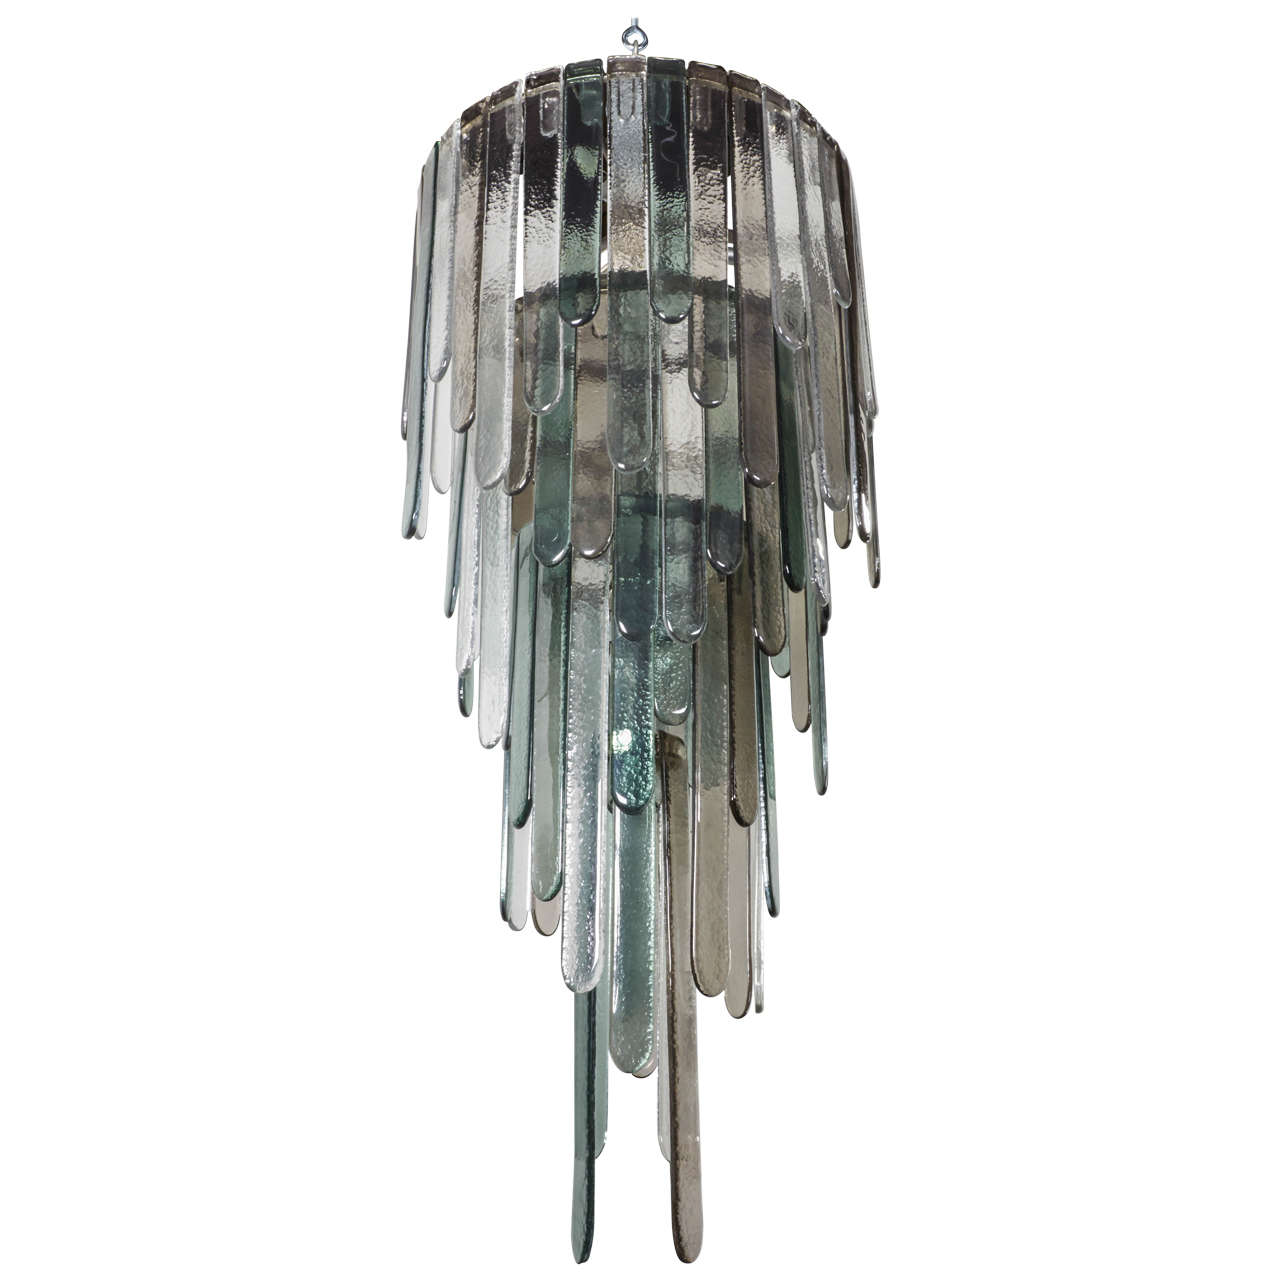 This spectacular statement fixture features over 120 handblown glass prisms in transparent hues of smoked grey, dark green and clear glass. The Murano prisms have flat design with rounded ends and a smooth organic texture. The prisms hang at varying